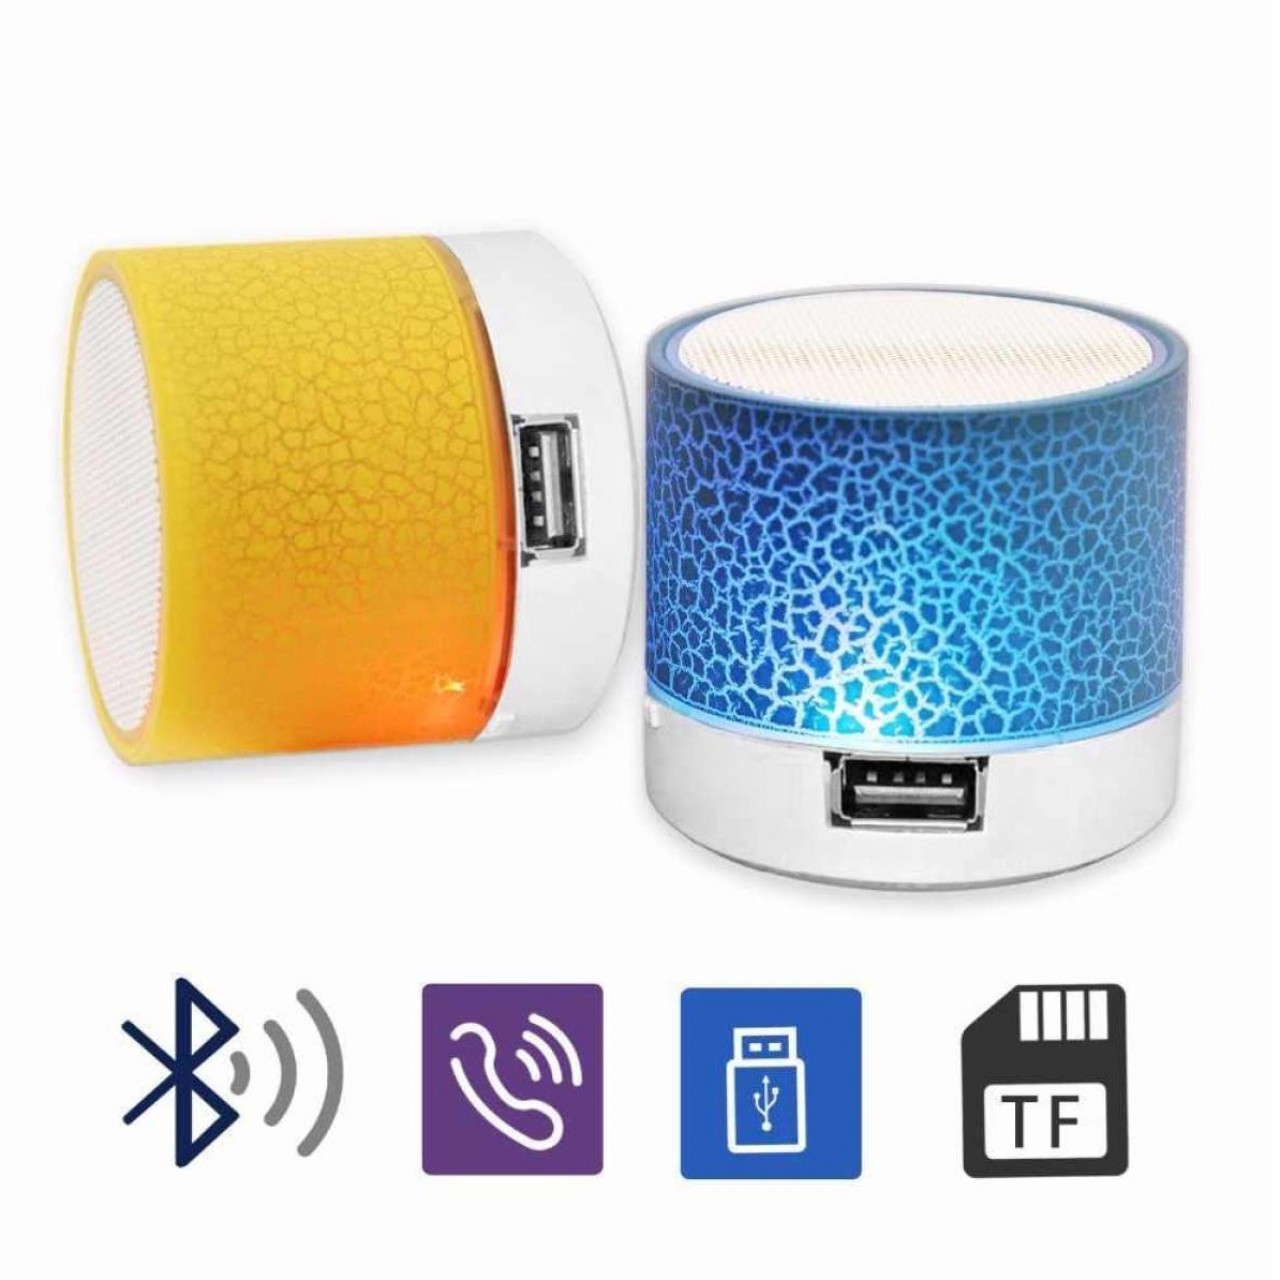 Portable Wireless LED Bluetooth Speaker with USB Slot For Music Plug & Play- MP3 Player